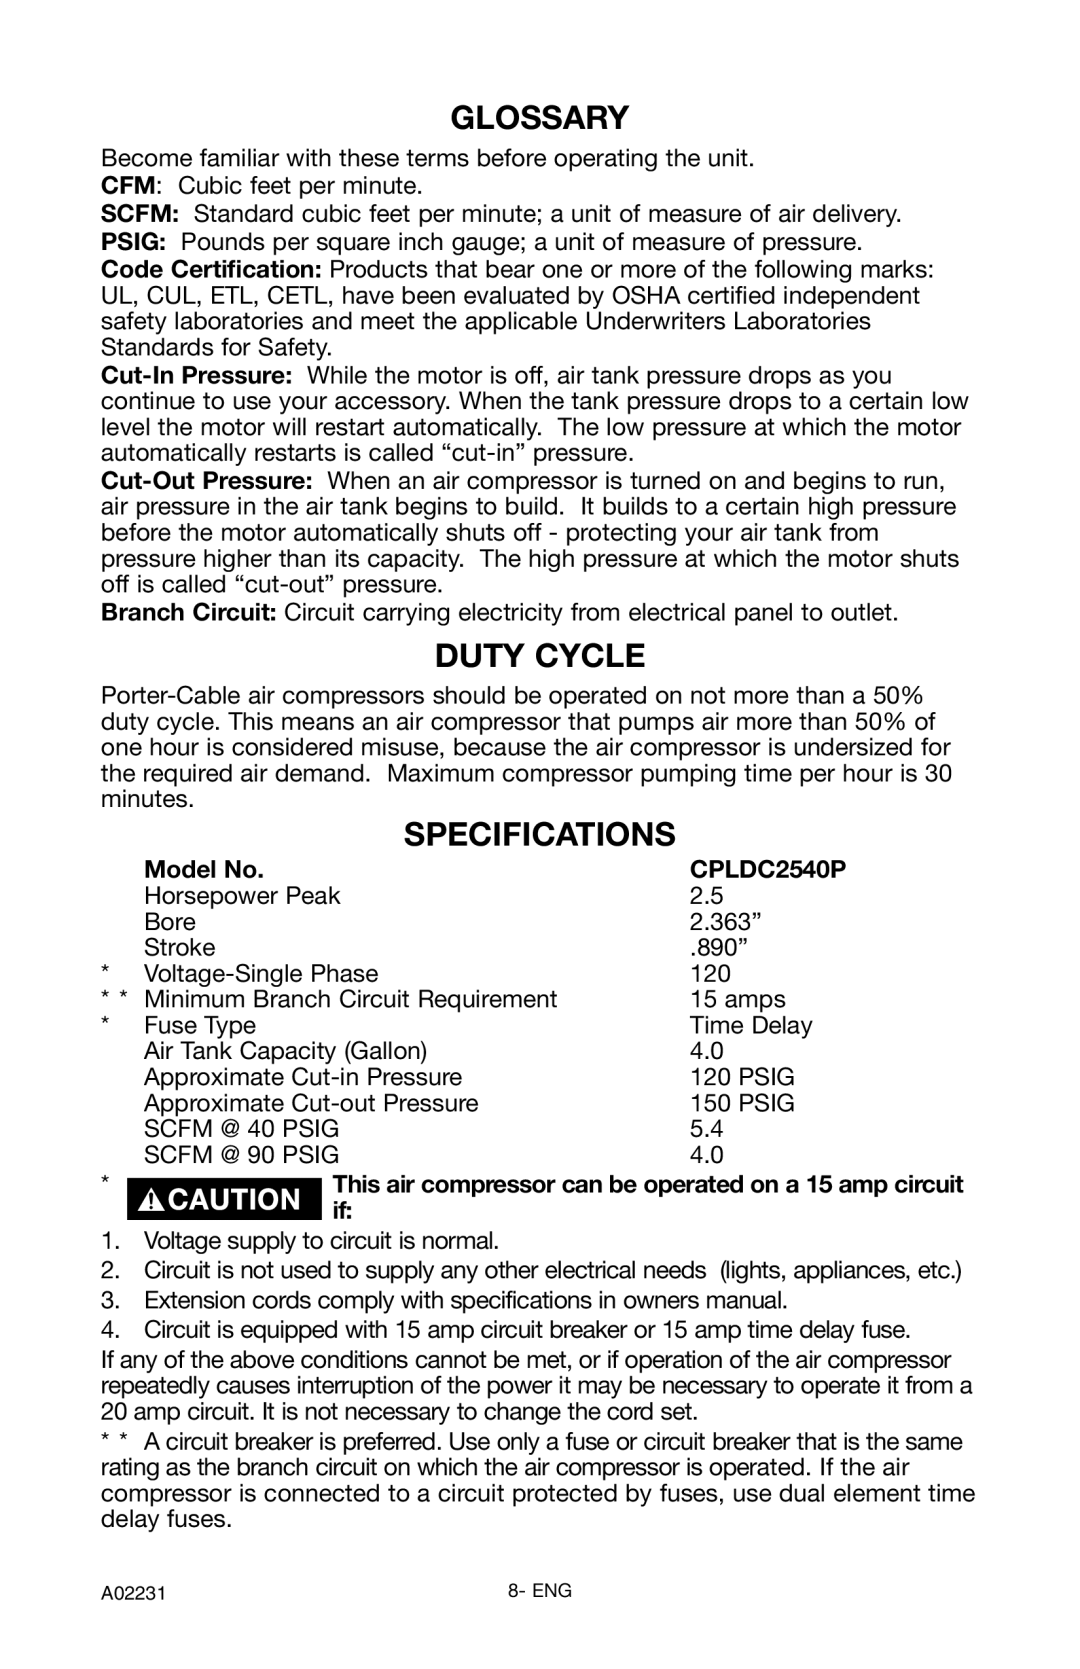 Porter-Cable CPLDC2540P instruction manual Glossary, Duty Cycle, Specifications, Model No 